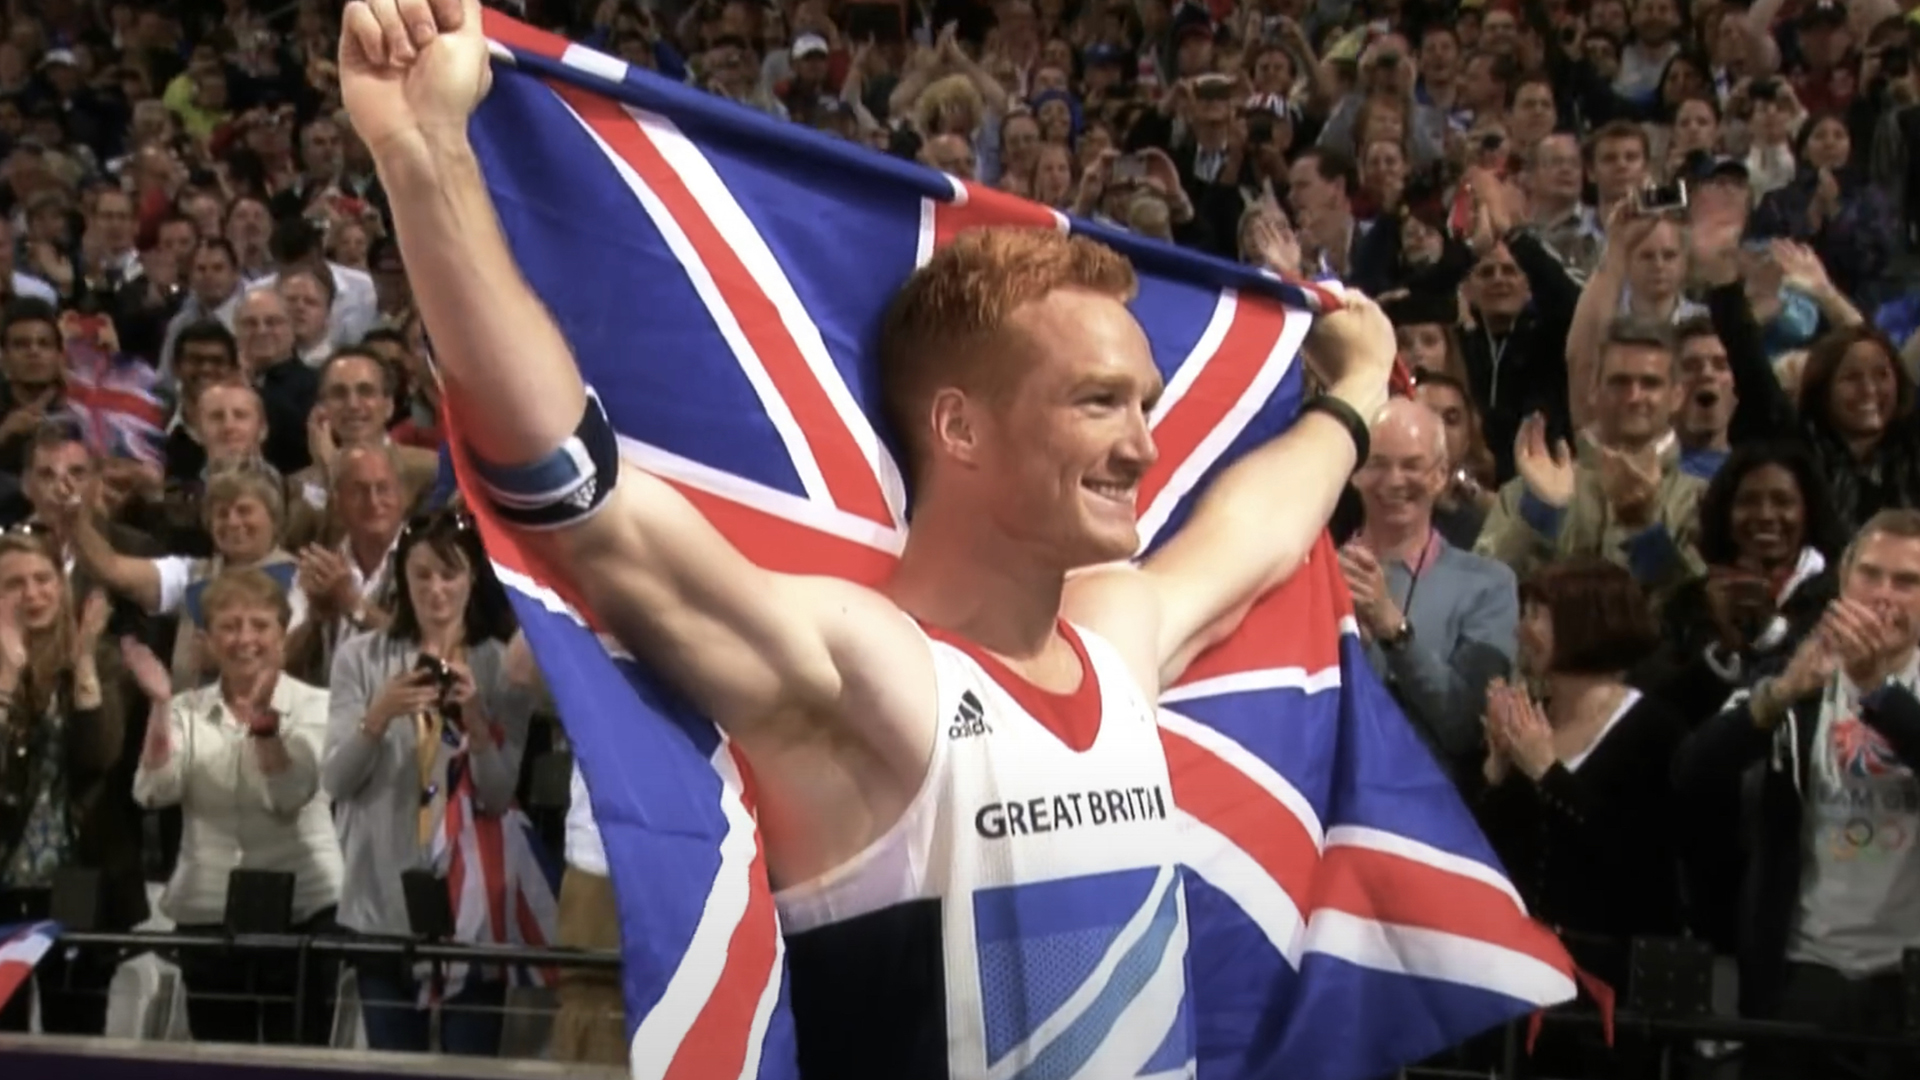 Greg Rutherford at the London Olympics